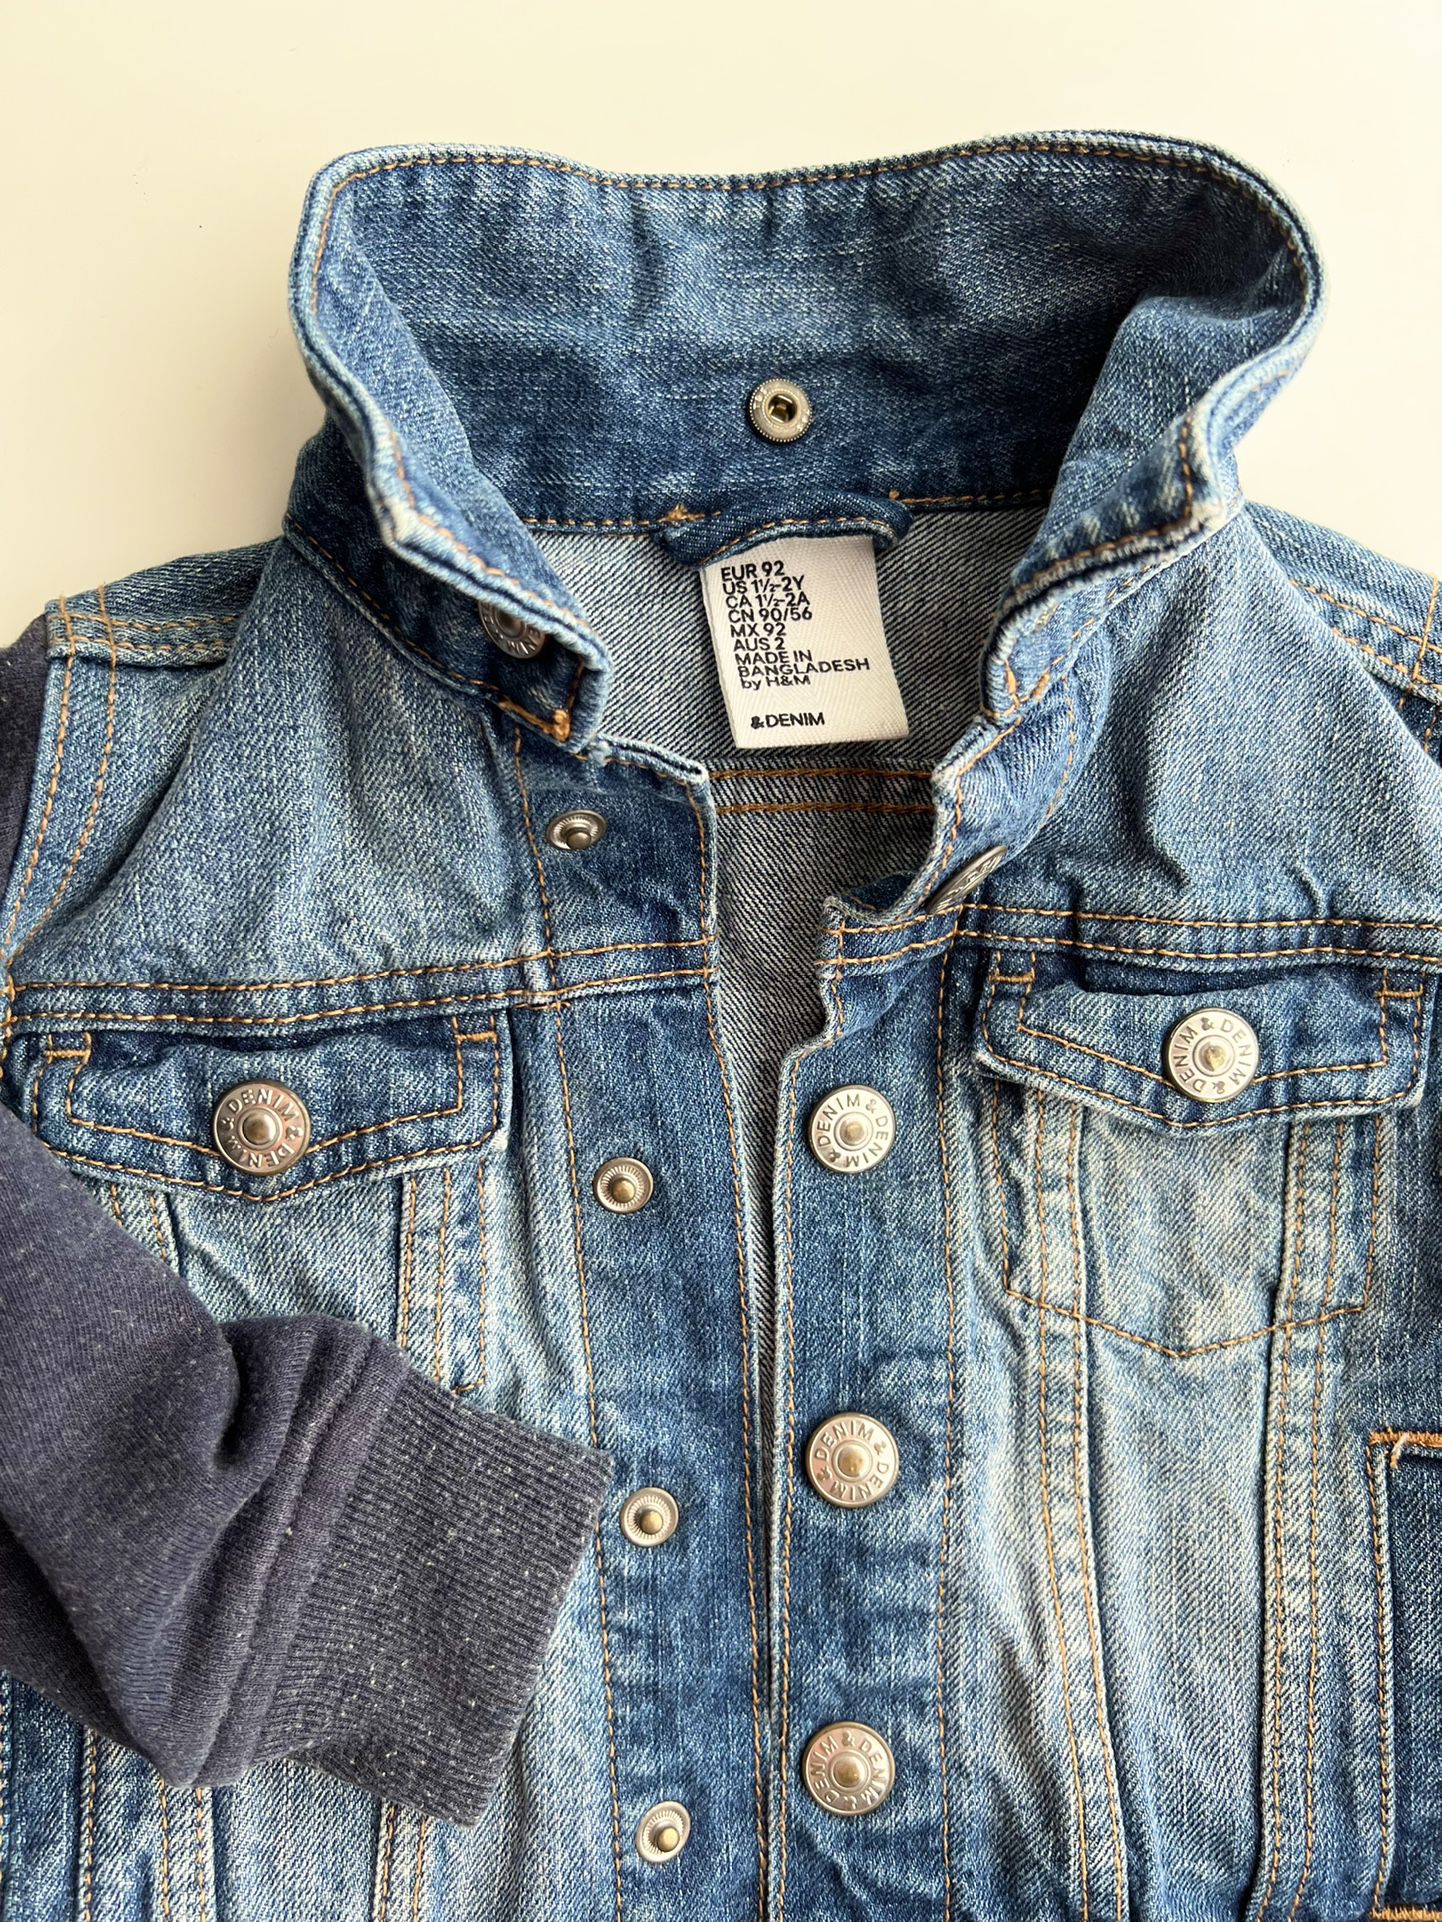 Boy’s Toddler H&M Denim 1 1/2 - 2 Yrs, 18-24 mo Cool Cute Jacket With Hoodie And Pockets 